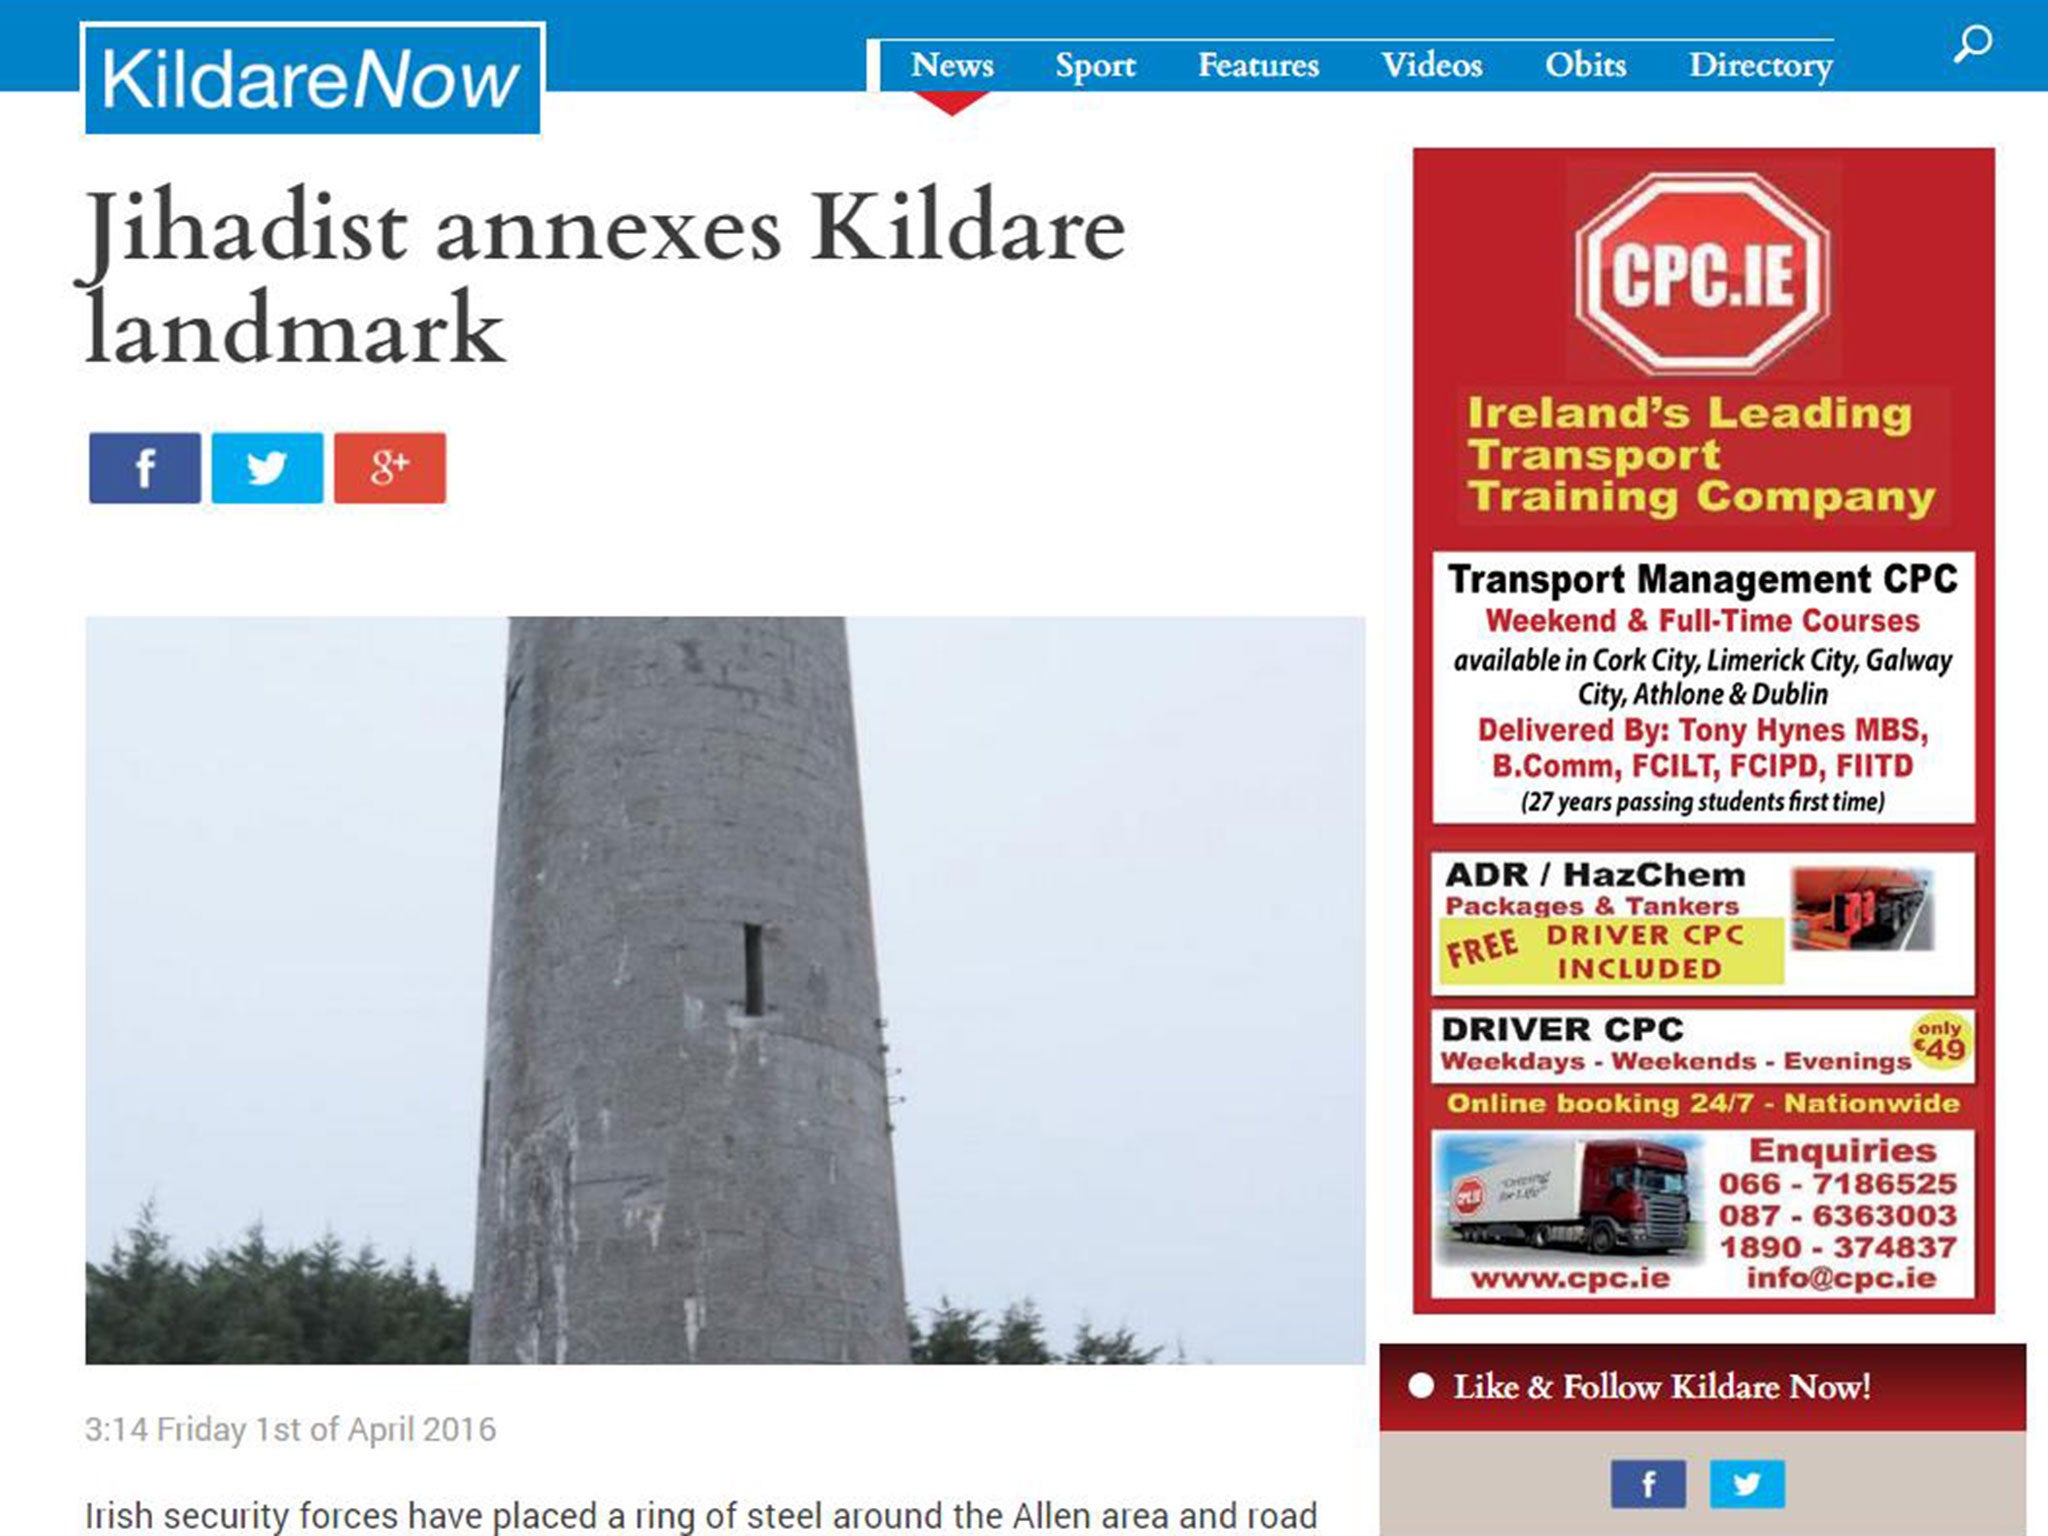 Kildare Now's April Fools' Day story